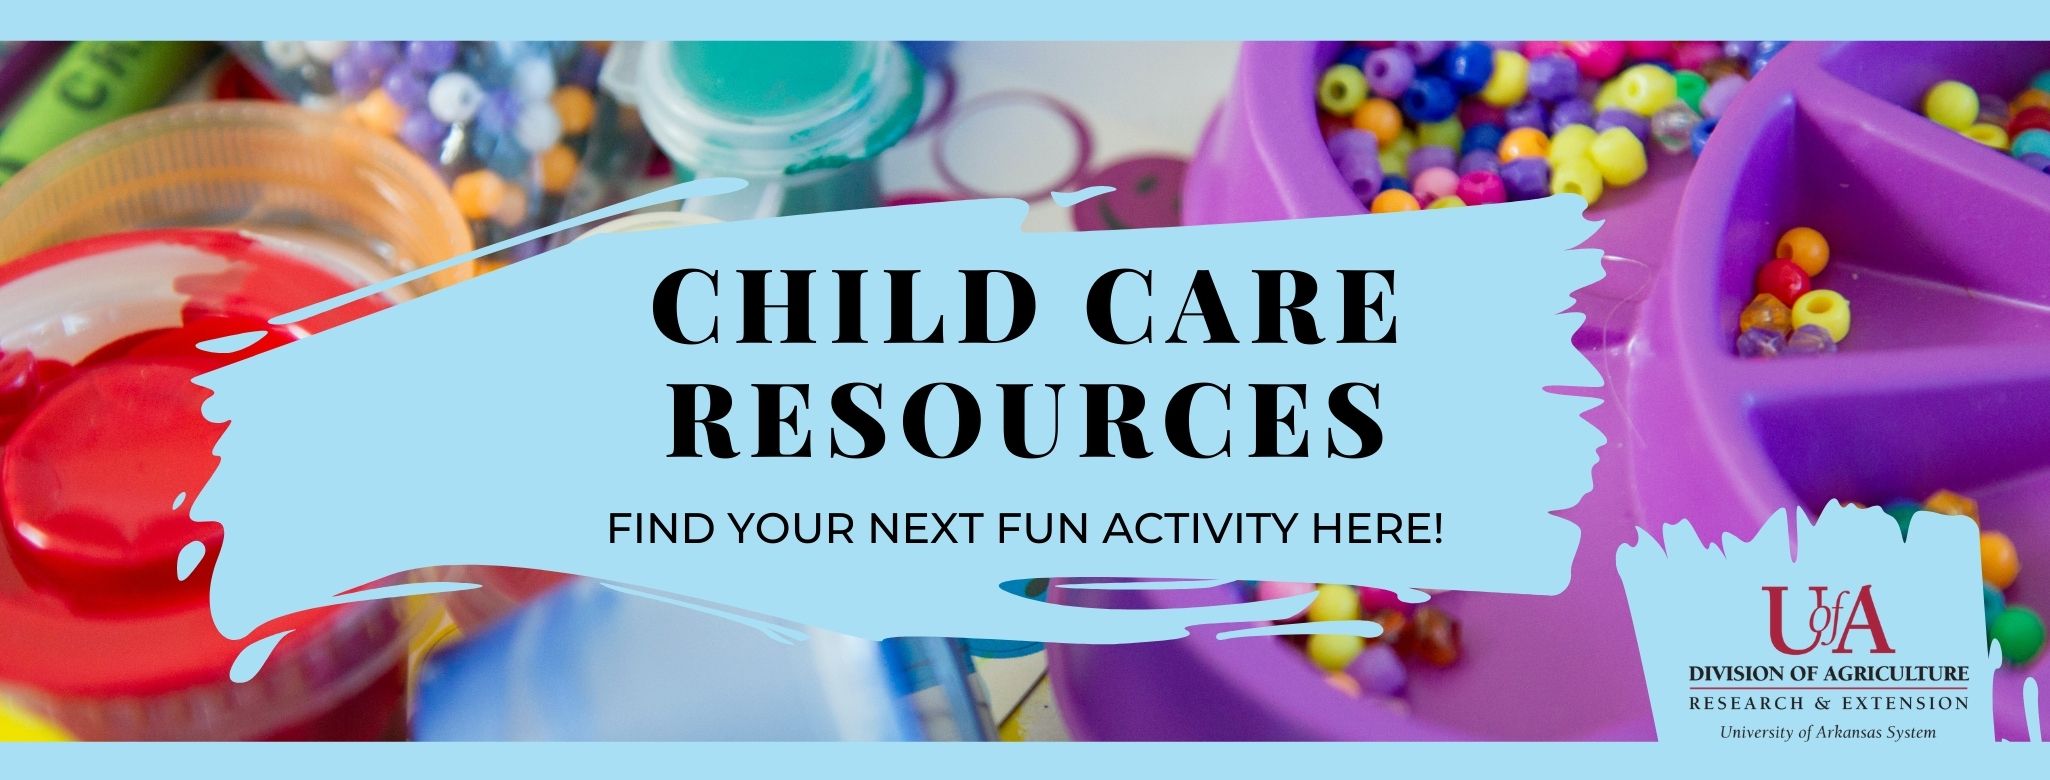 Child care resources - find your next fun activity here